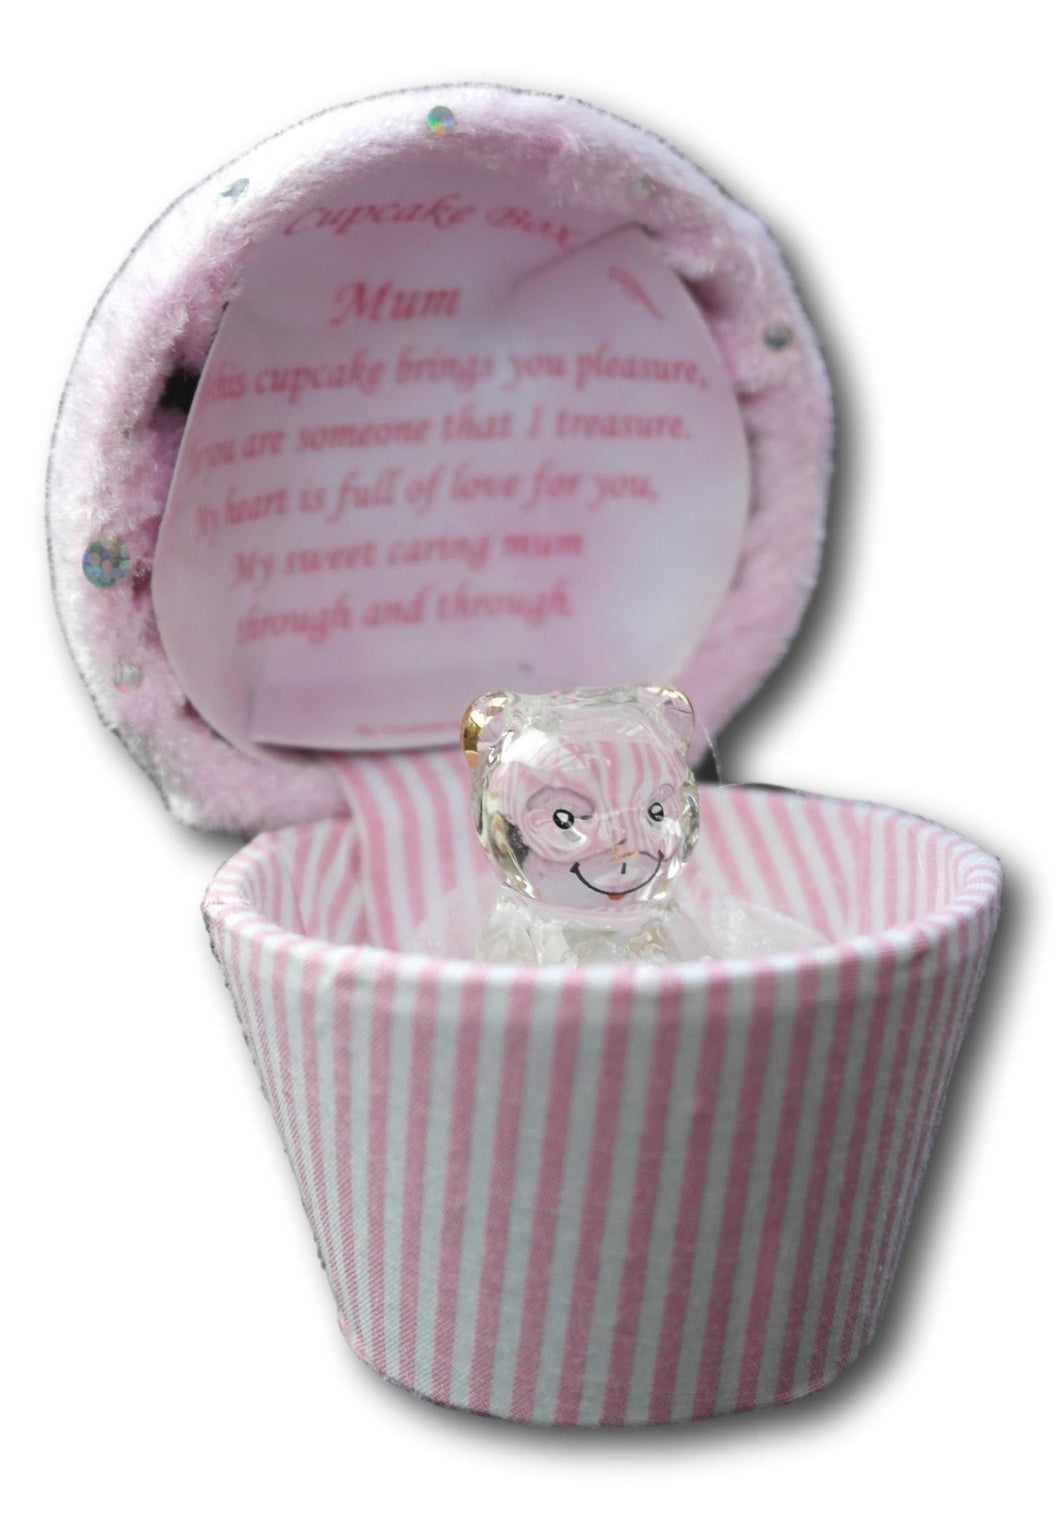 Glass bear in a cupcake shaped gift box for a special mum